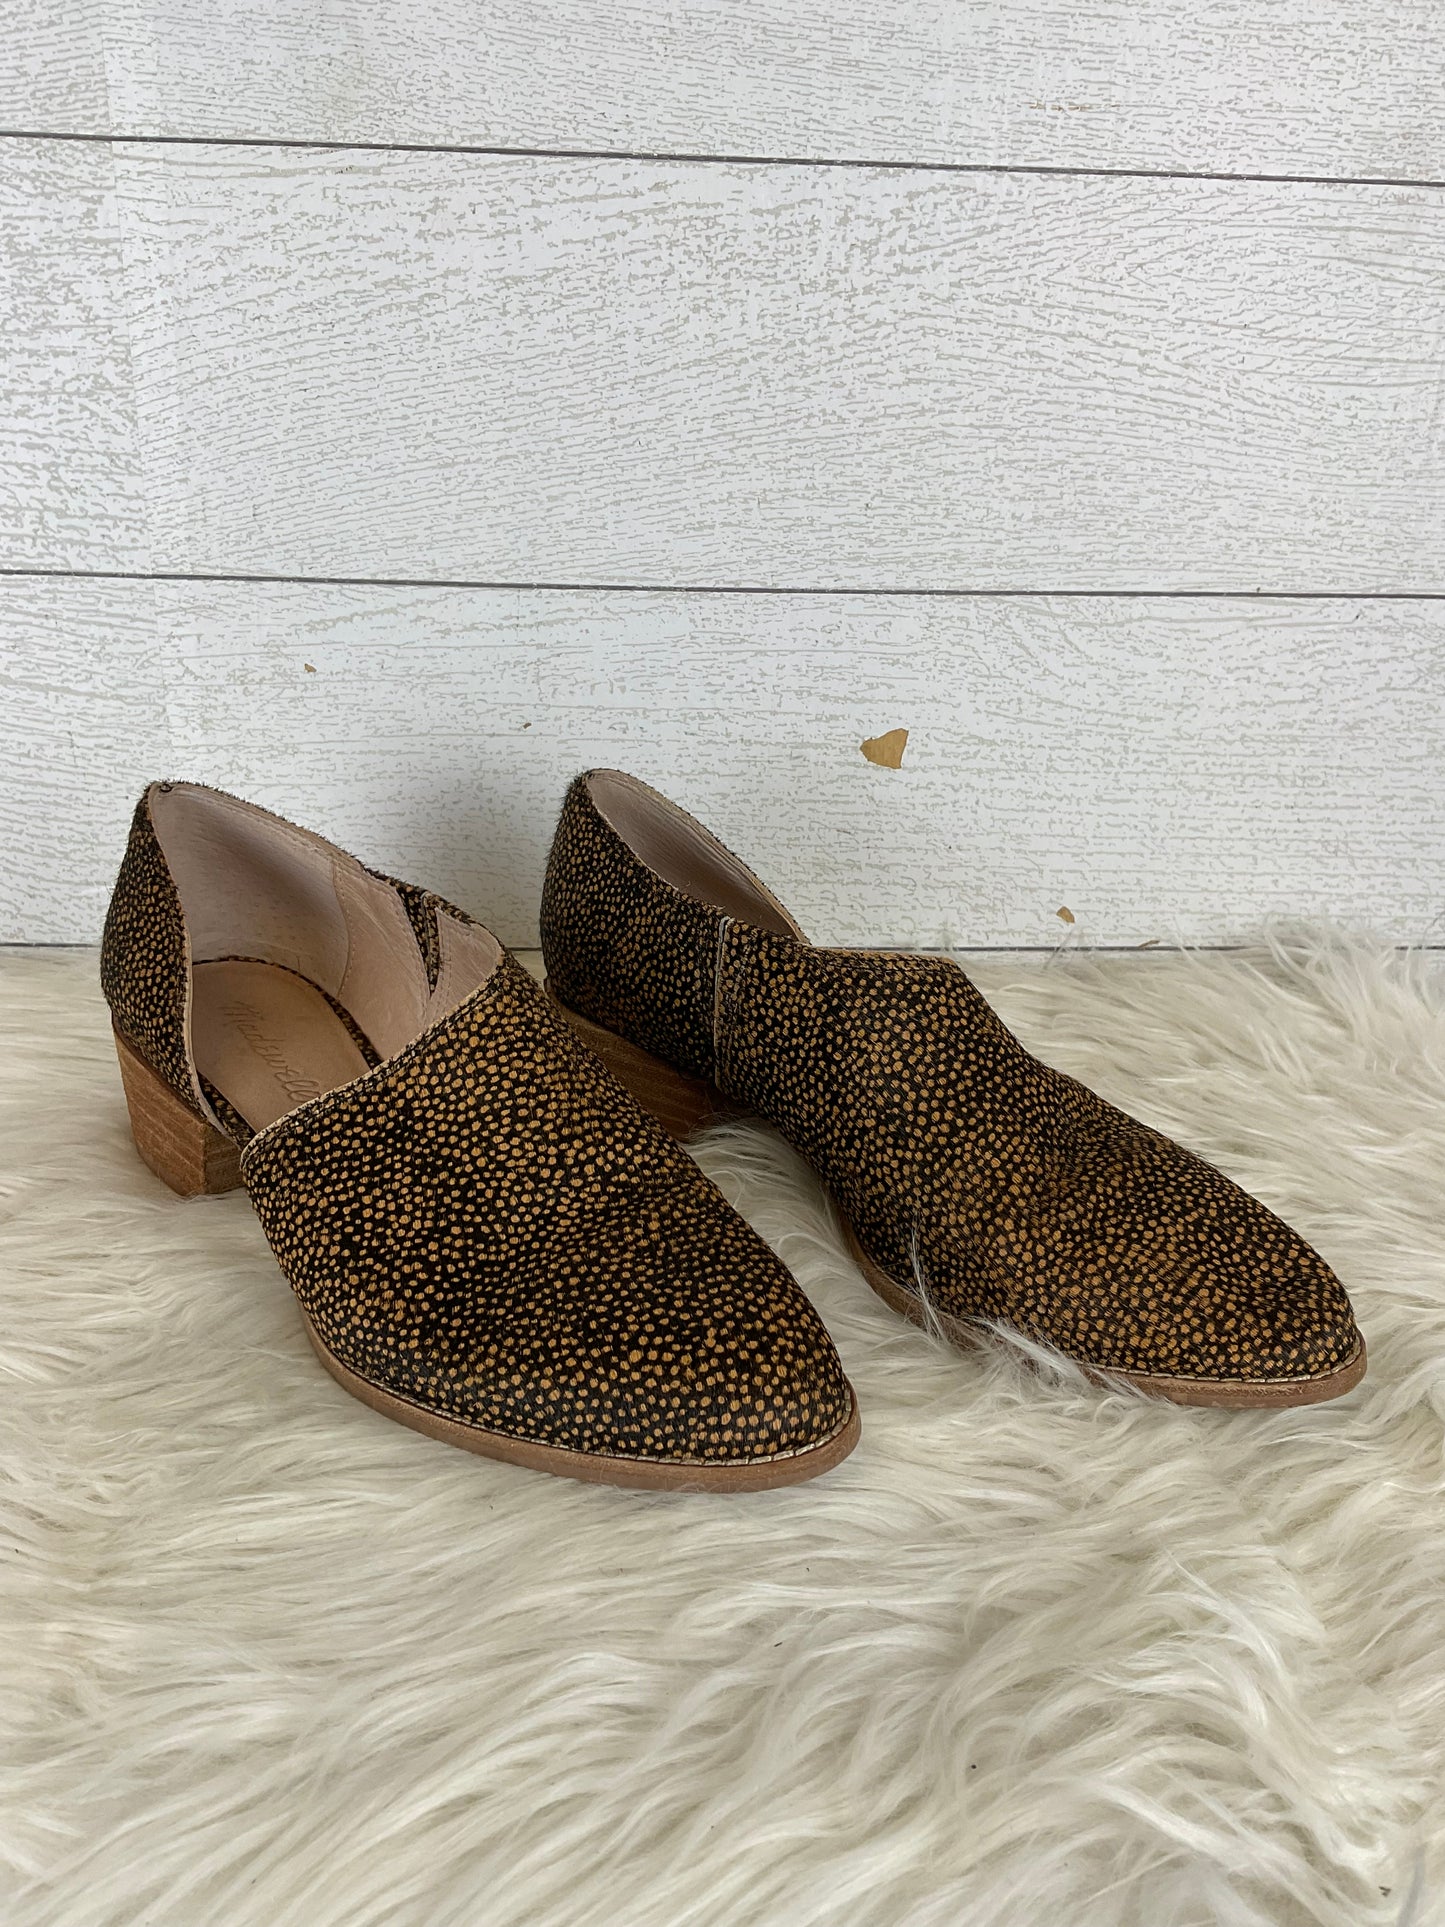 Shoes Heels Block By Madewell  Size: 7.5